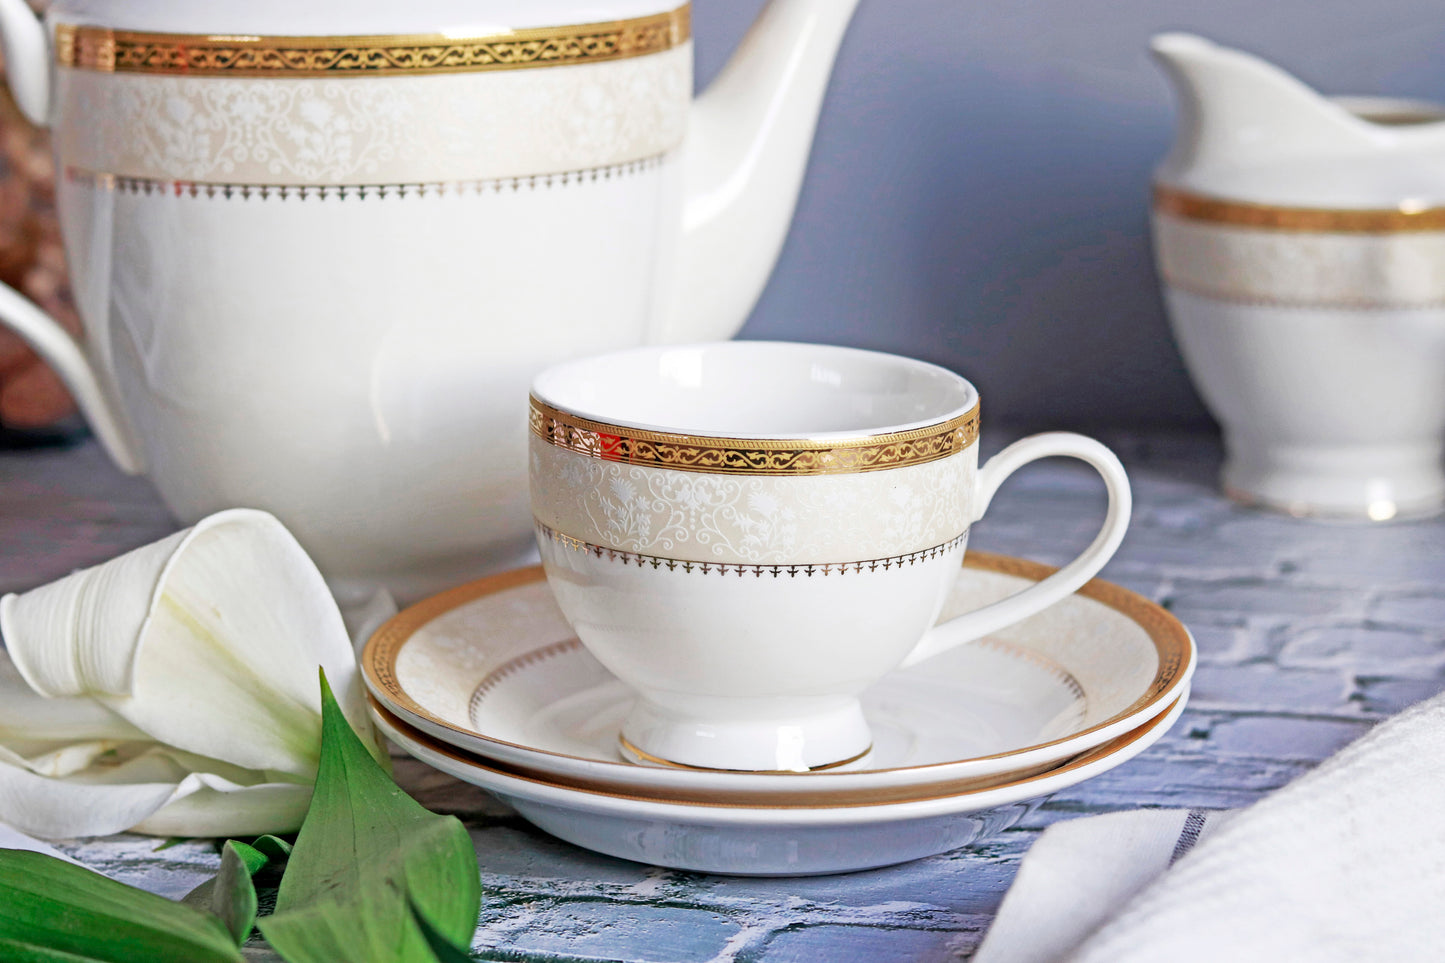 Crème Gold Cup and Saucer Set (6 Cups and 6 Saucers) - Vigneto